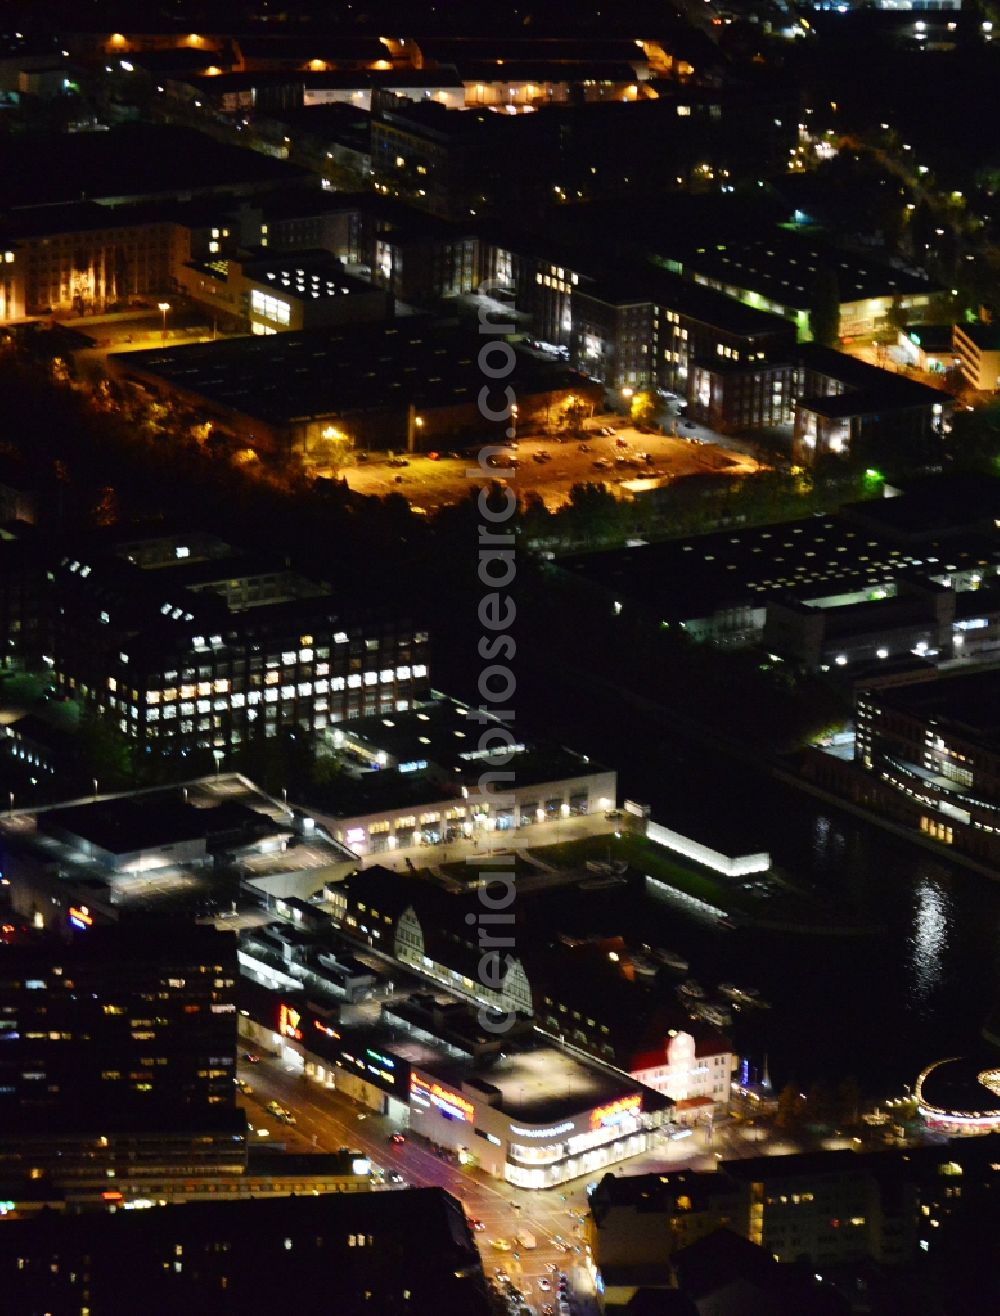 Aerial image Berlin - Night image with a view over the shoppingcenter Tempelhofer Hafen at the Friedrich-Karl-Strasse in the district Tempelhof-Schoeneberg in Berlin